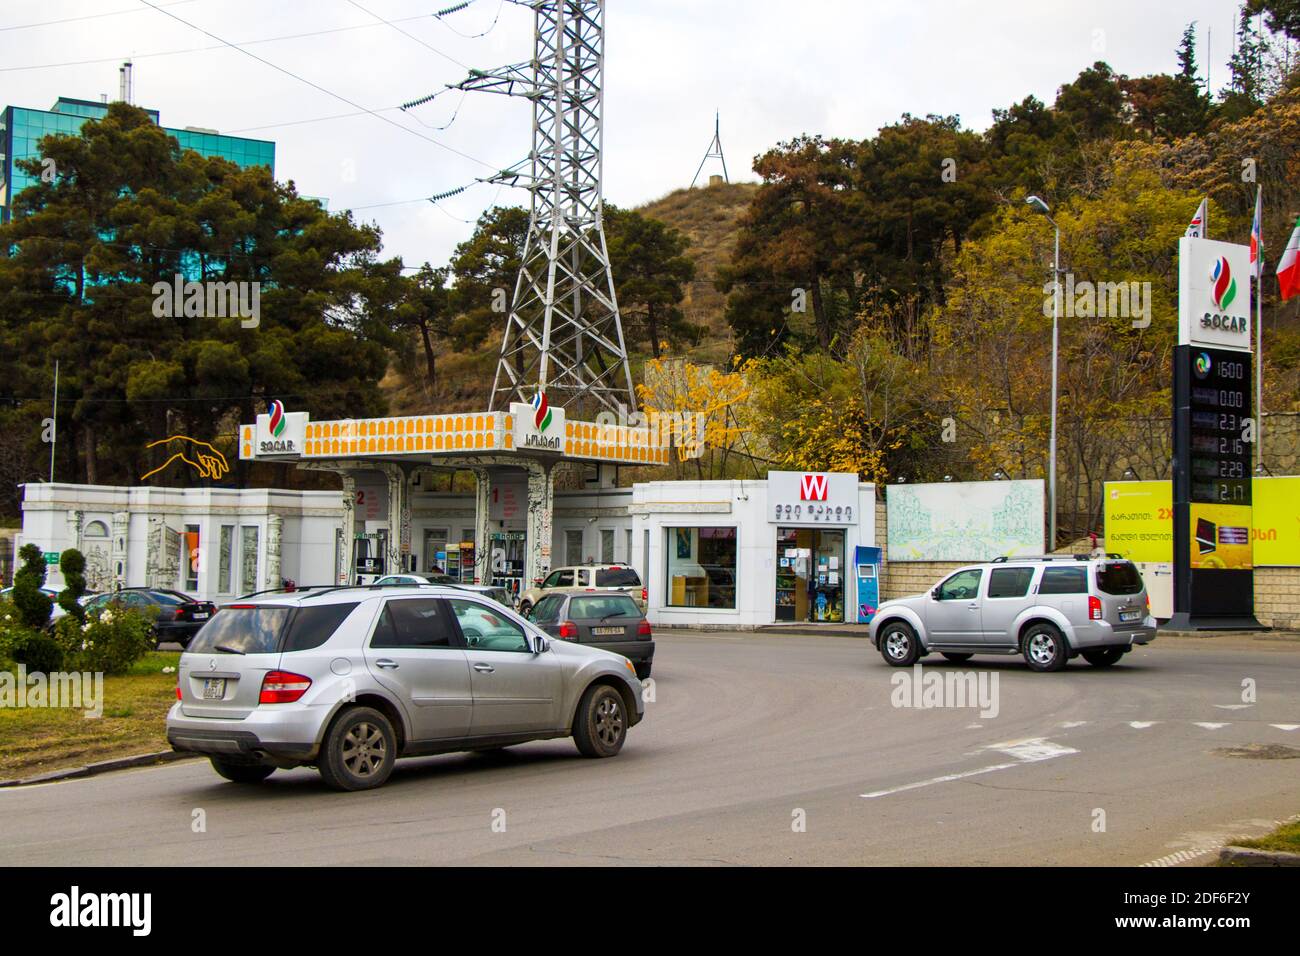 Tbilisi, Georgia - December 1, 2020: Socar petrol station, garage and market. Cars and autos on the road. Stock Photo